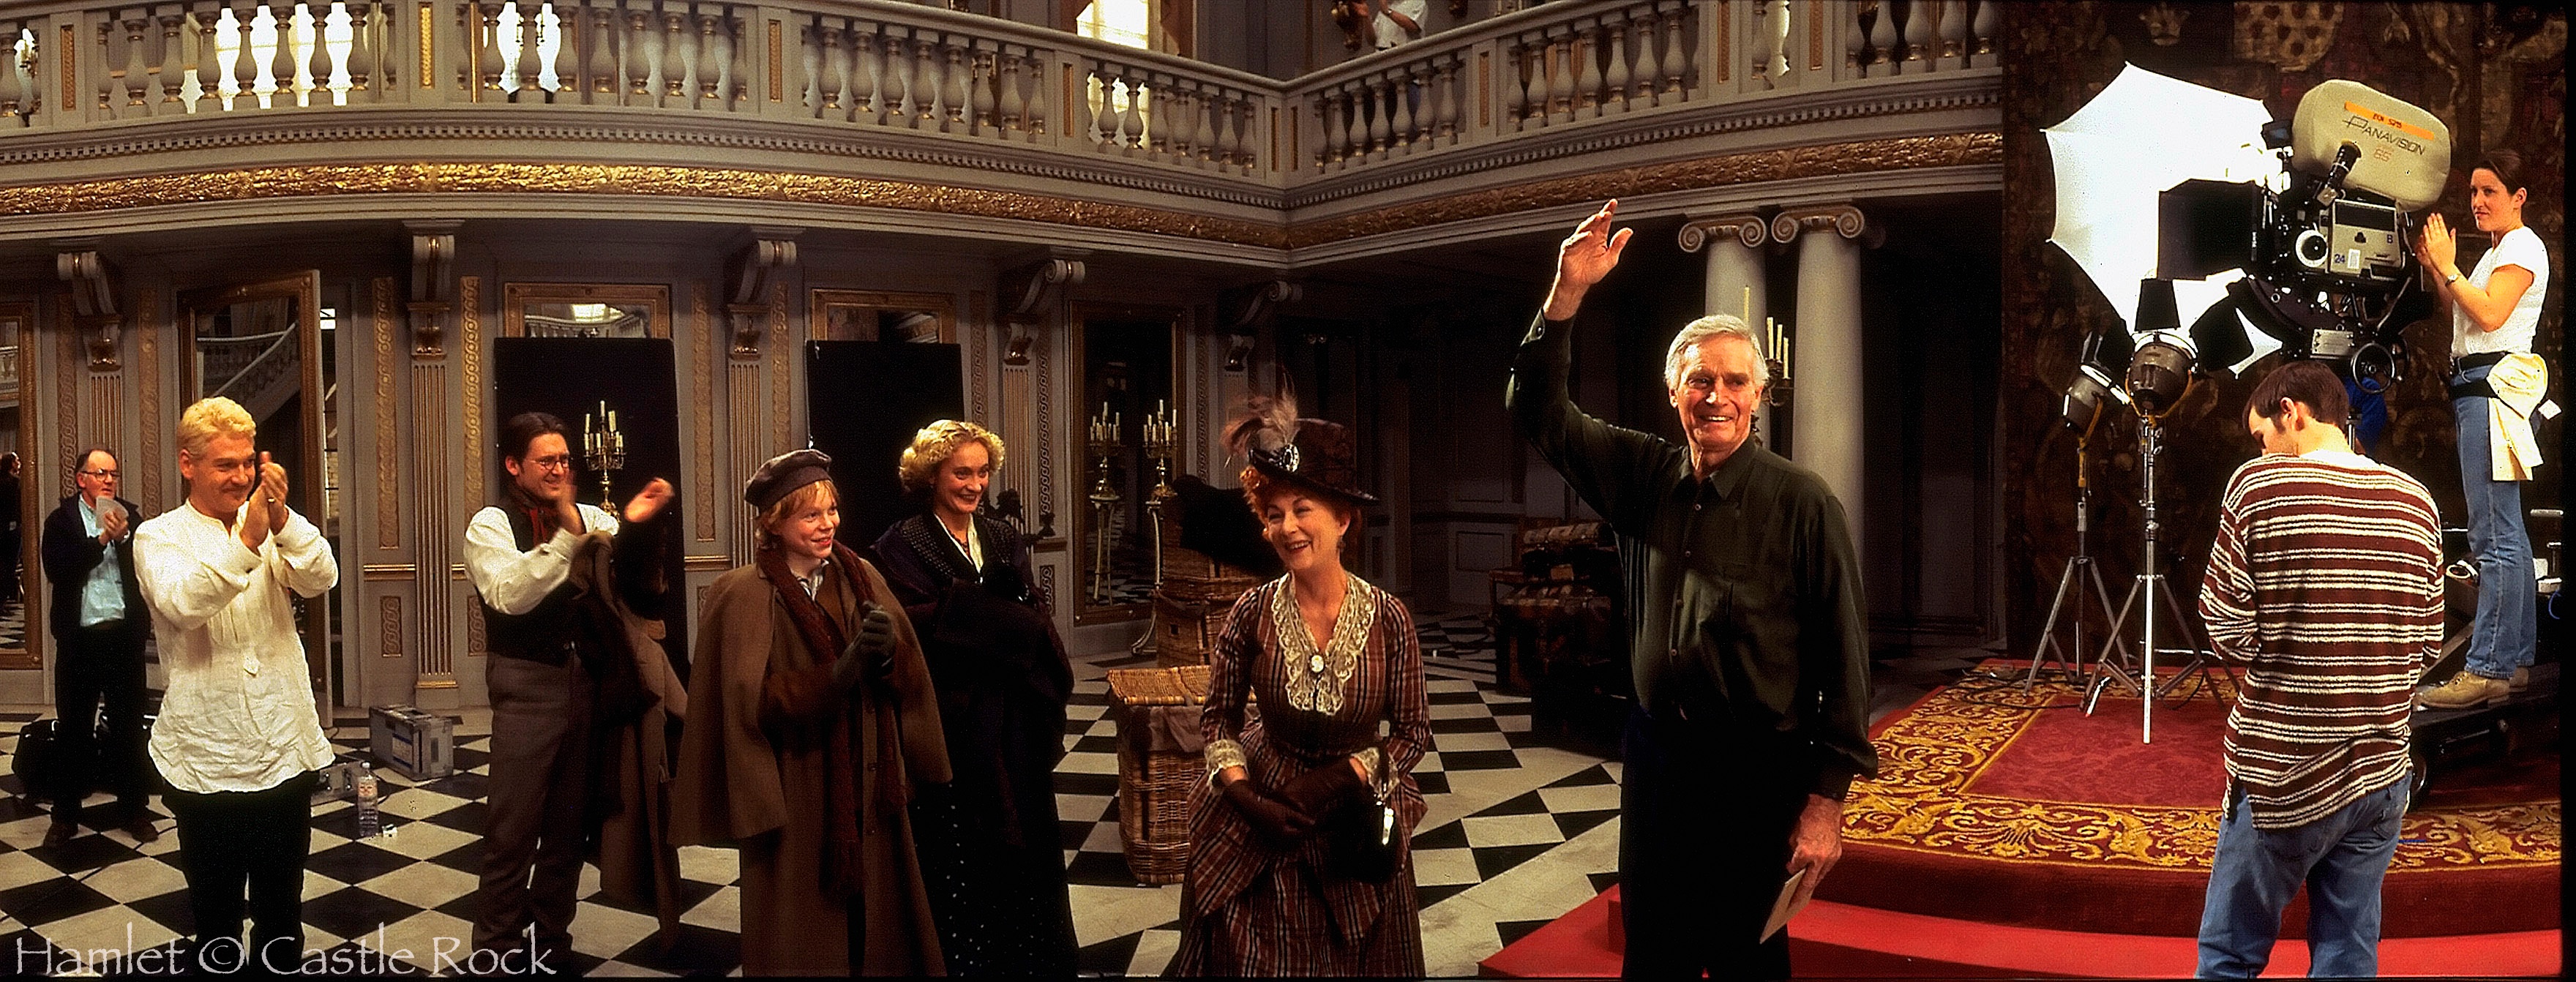 Hamlet. 1996 Directed by Kenneth Branagh Charlston Heston is greeted by the film crew crew after his last shot on Hamlet